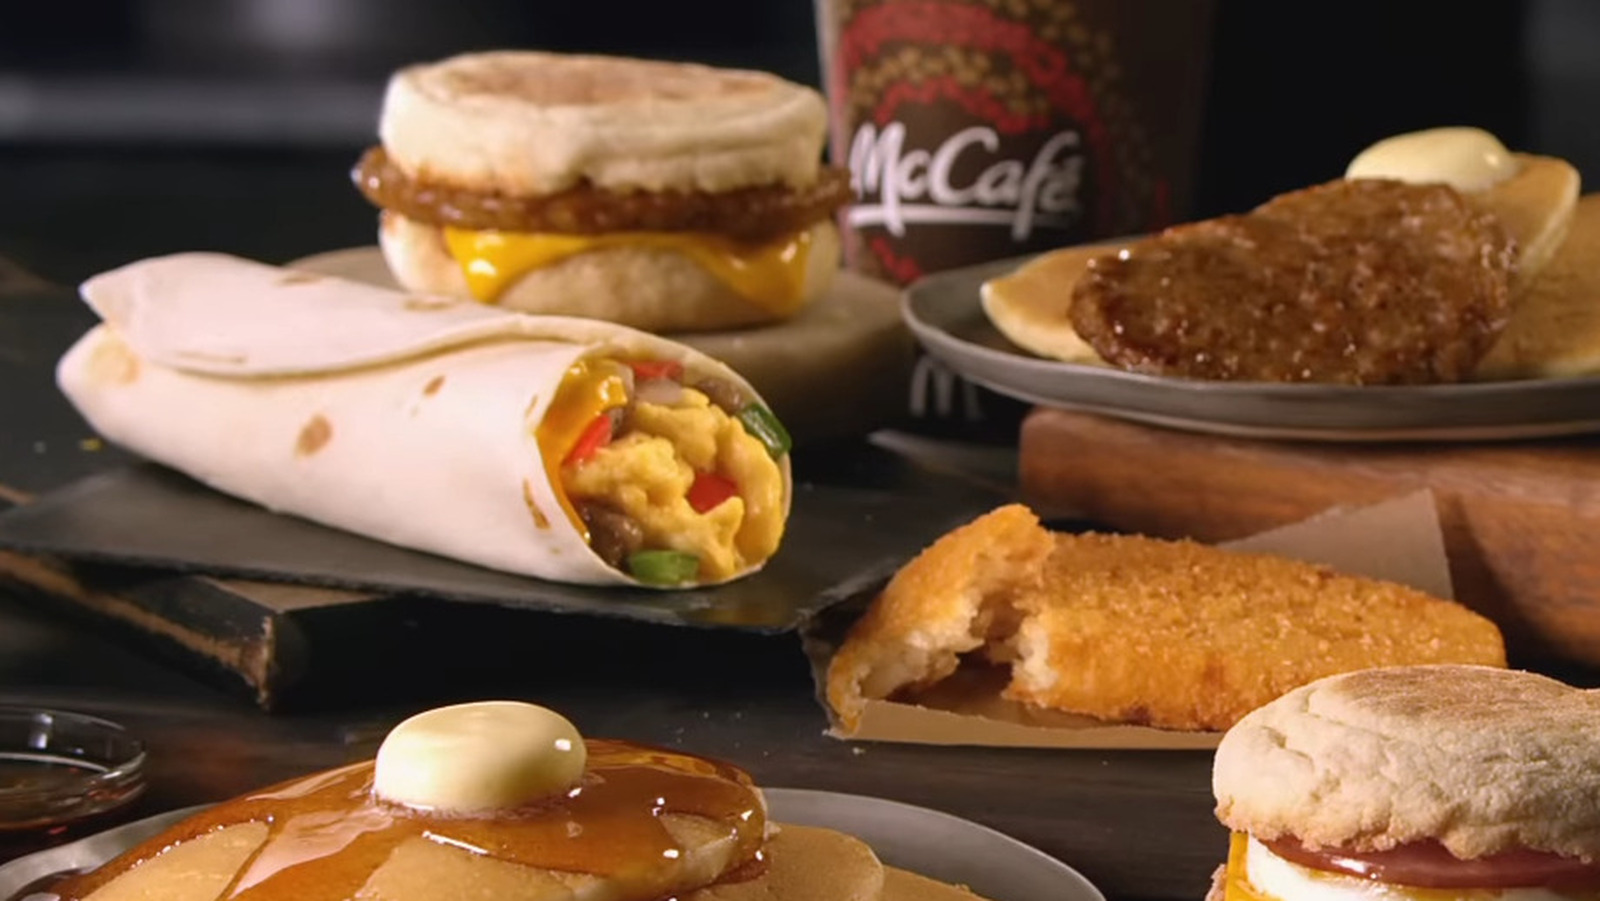 Discontinued Fast Food Breakfast Items We Wish Would Make A Comeback